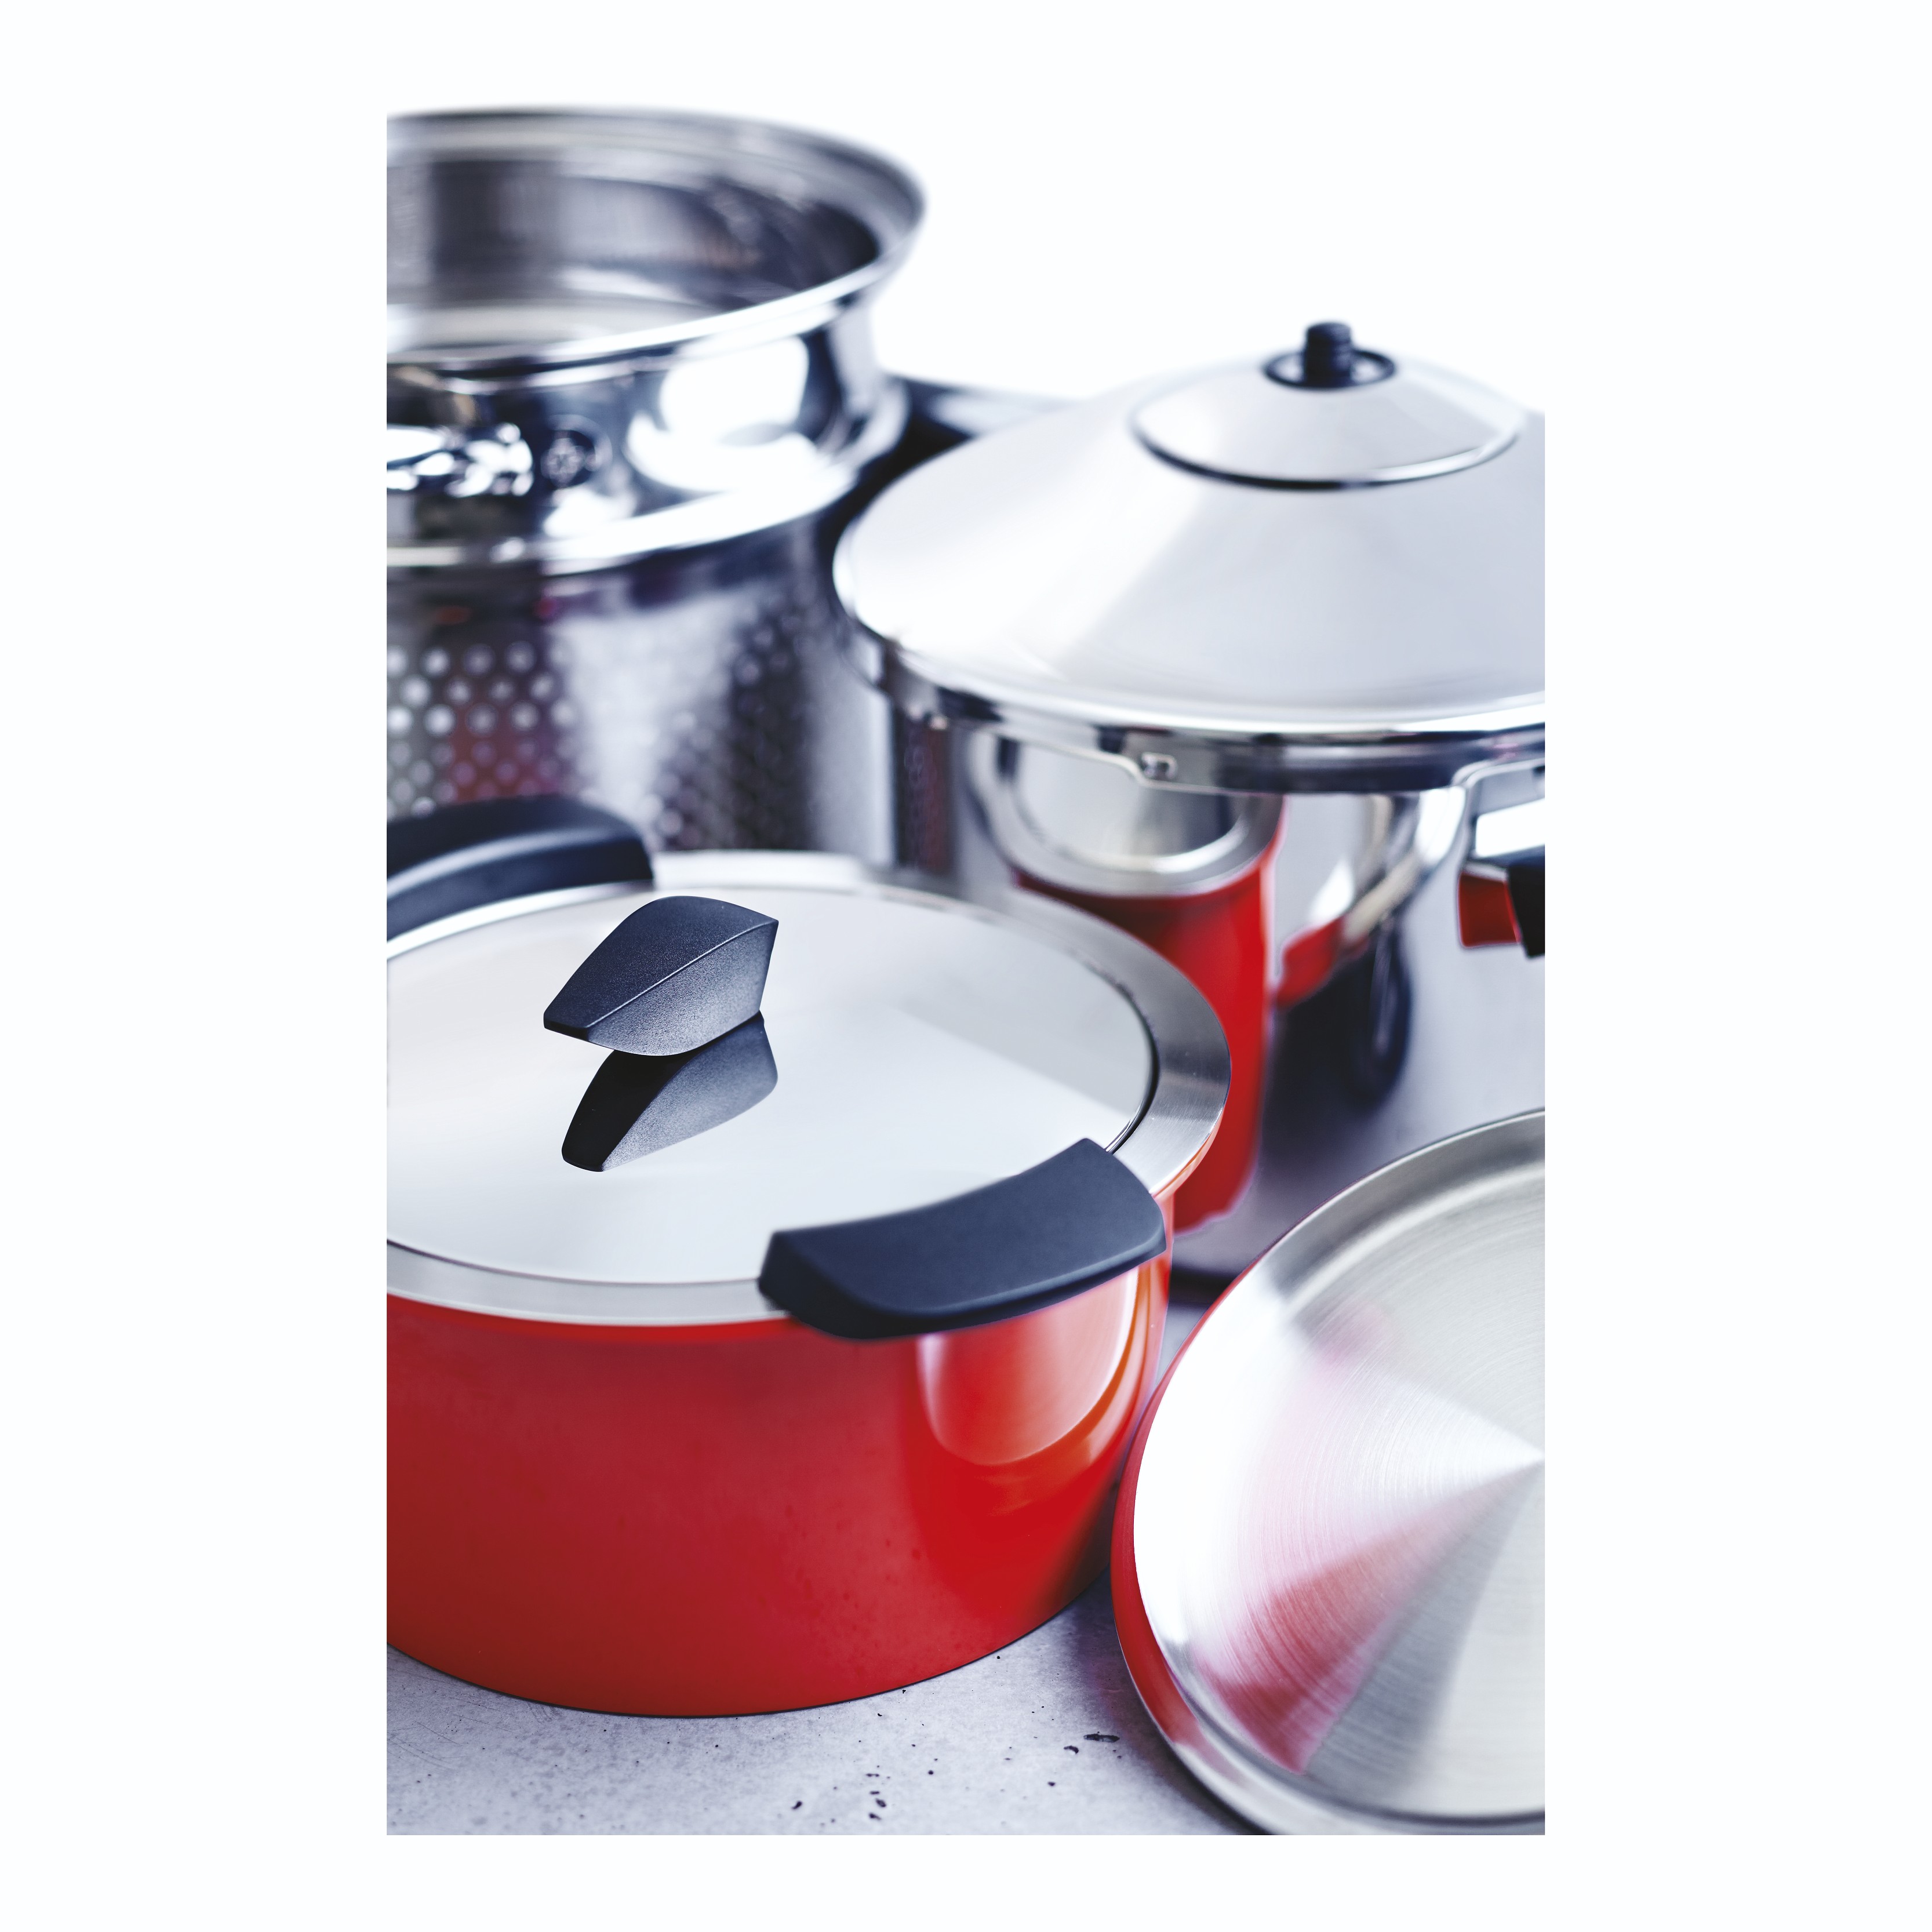 https://upload.wikimedia.org/wikipedia/commons/4/46/Products_Duromatic%2C_Hotpan_and_Cookware.jpg